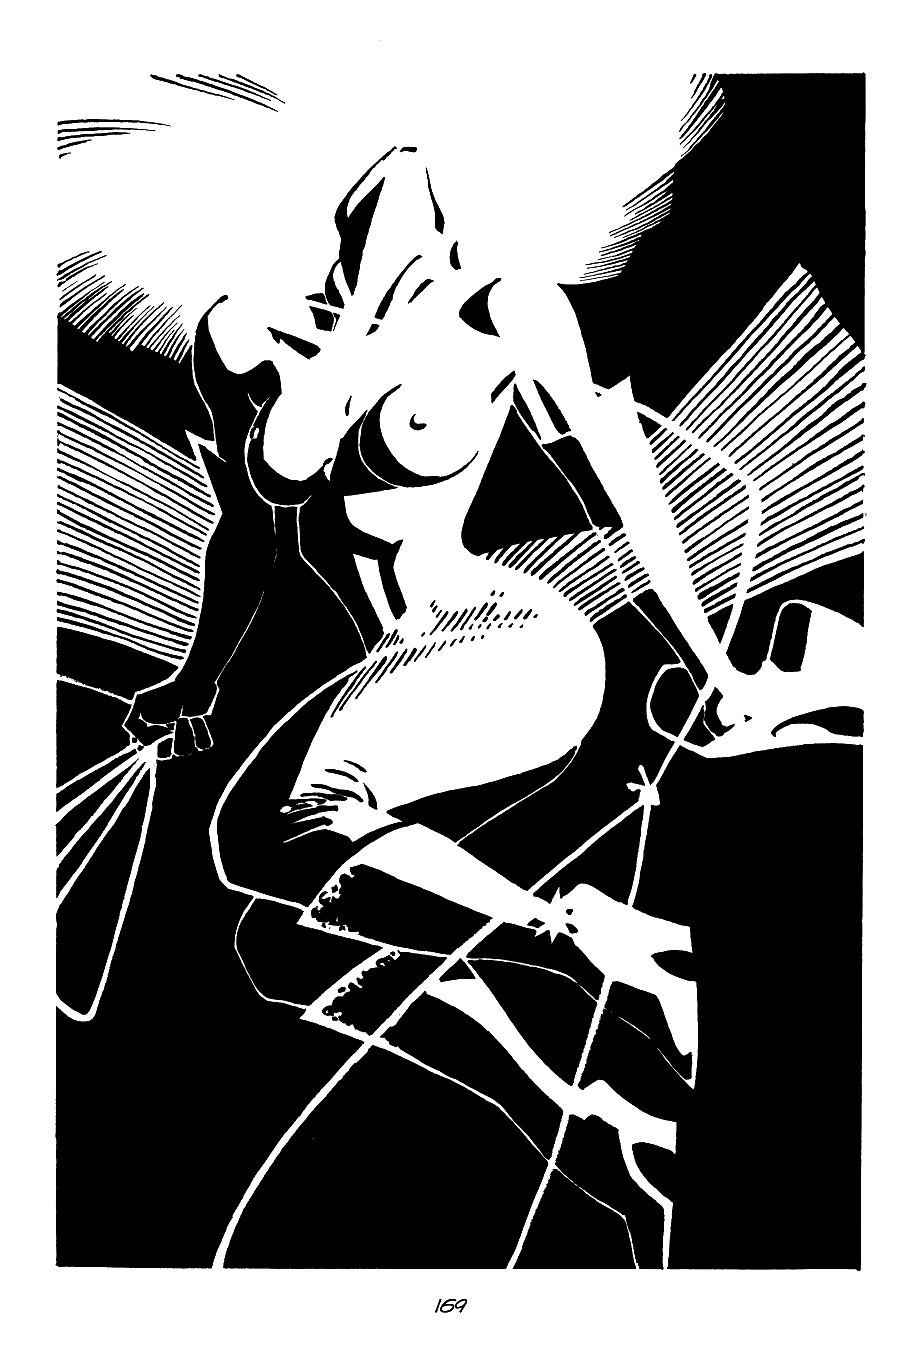 page 169 of sin city 2 the hard goodbye